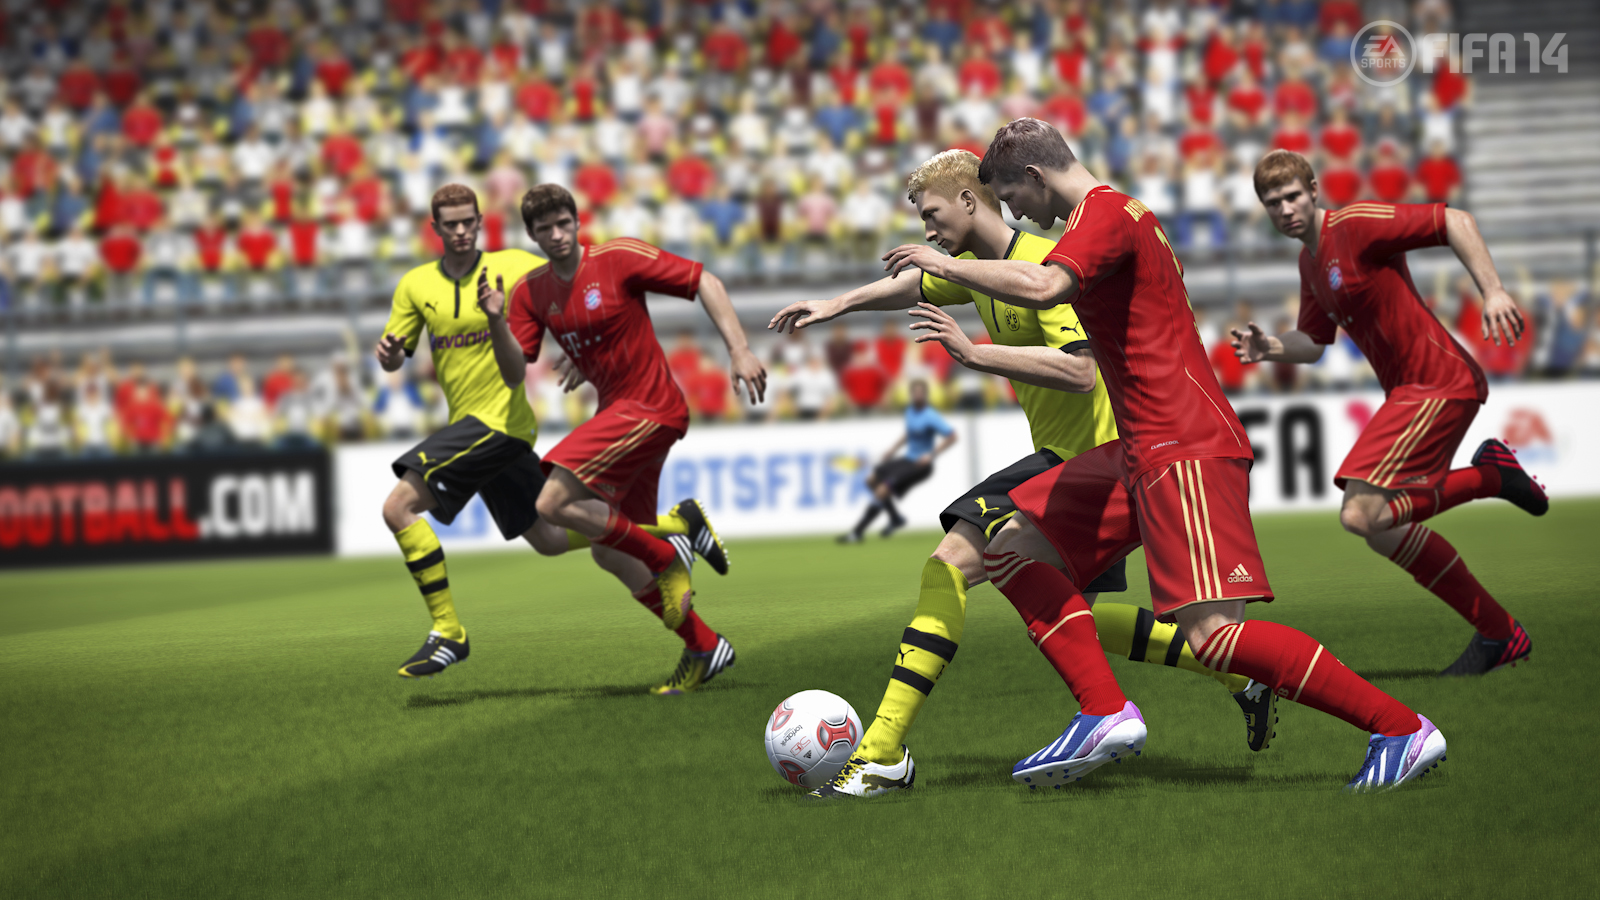 Media asset in full size related to 3dfxzone.it news item entitled as follows: EA Sports annuncia FIFA 14 e mostra i primi screenshots in-game | Image Name: news19364_FIFA-14-screenshot_5.jpg